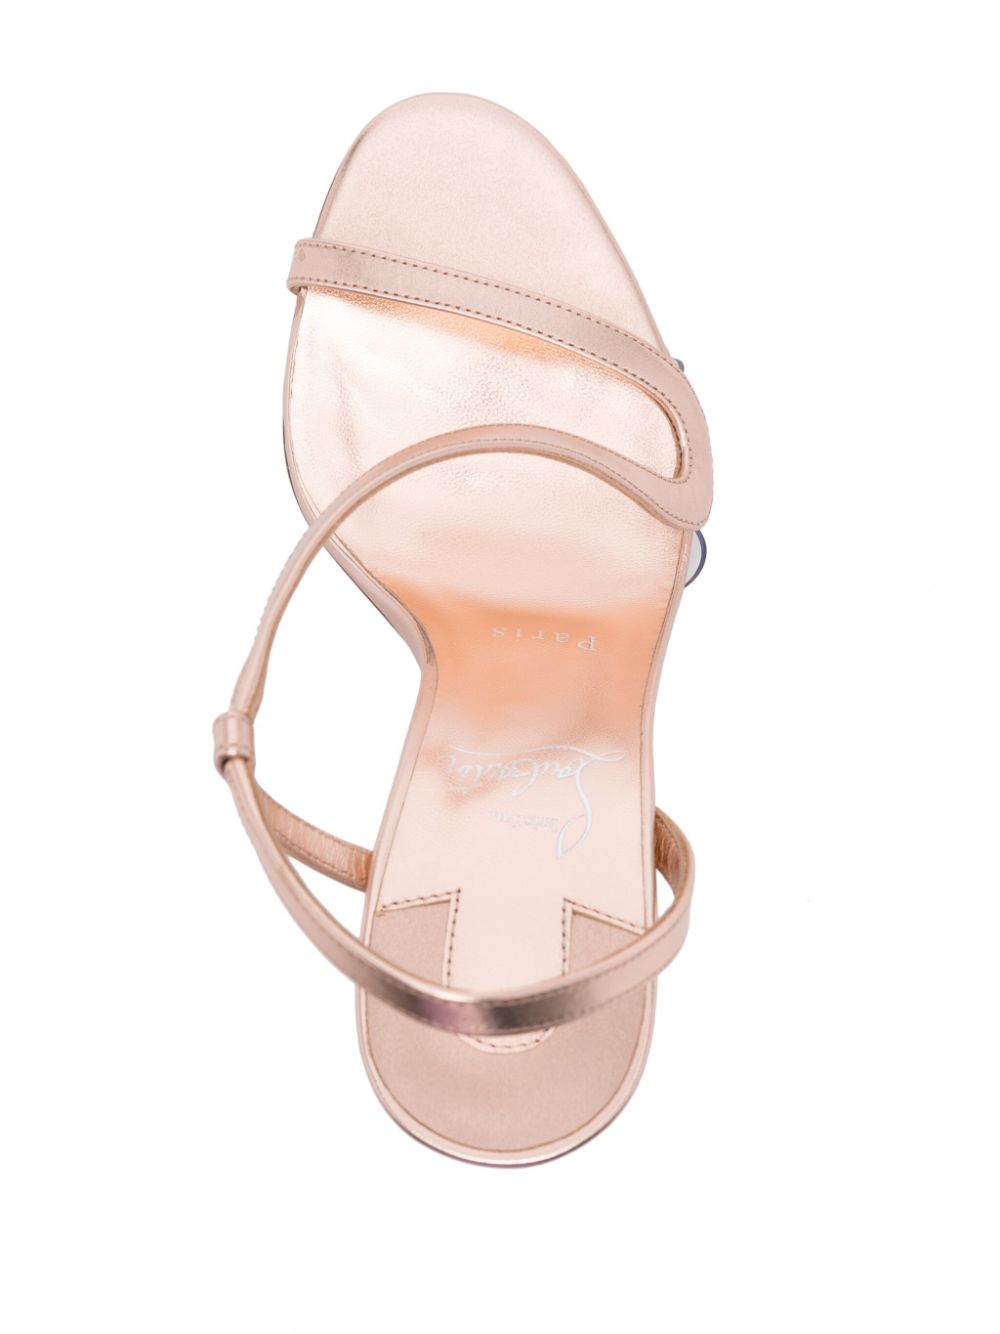 Salmon Pink Leather Sandals with 100mm Stiletto Heel